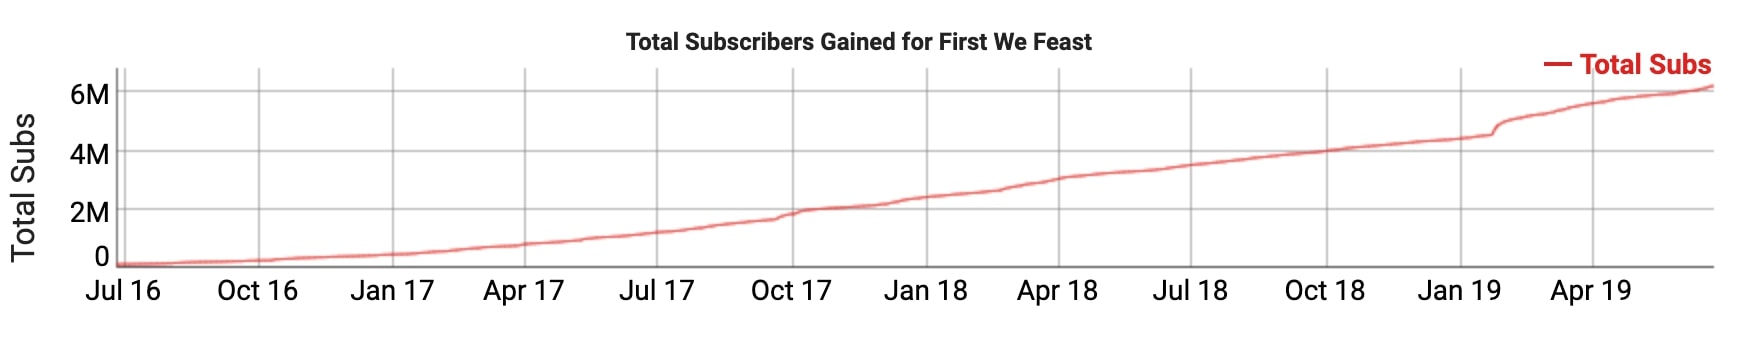 first we feast's subscriber growth over time on youtube